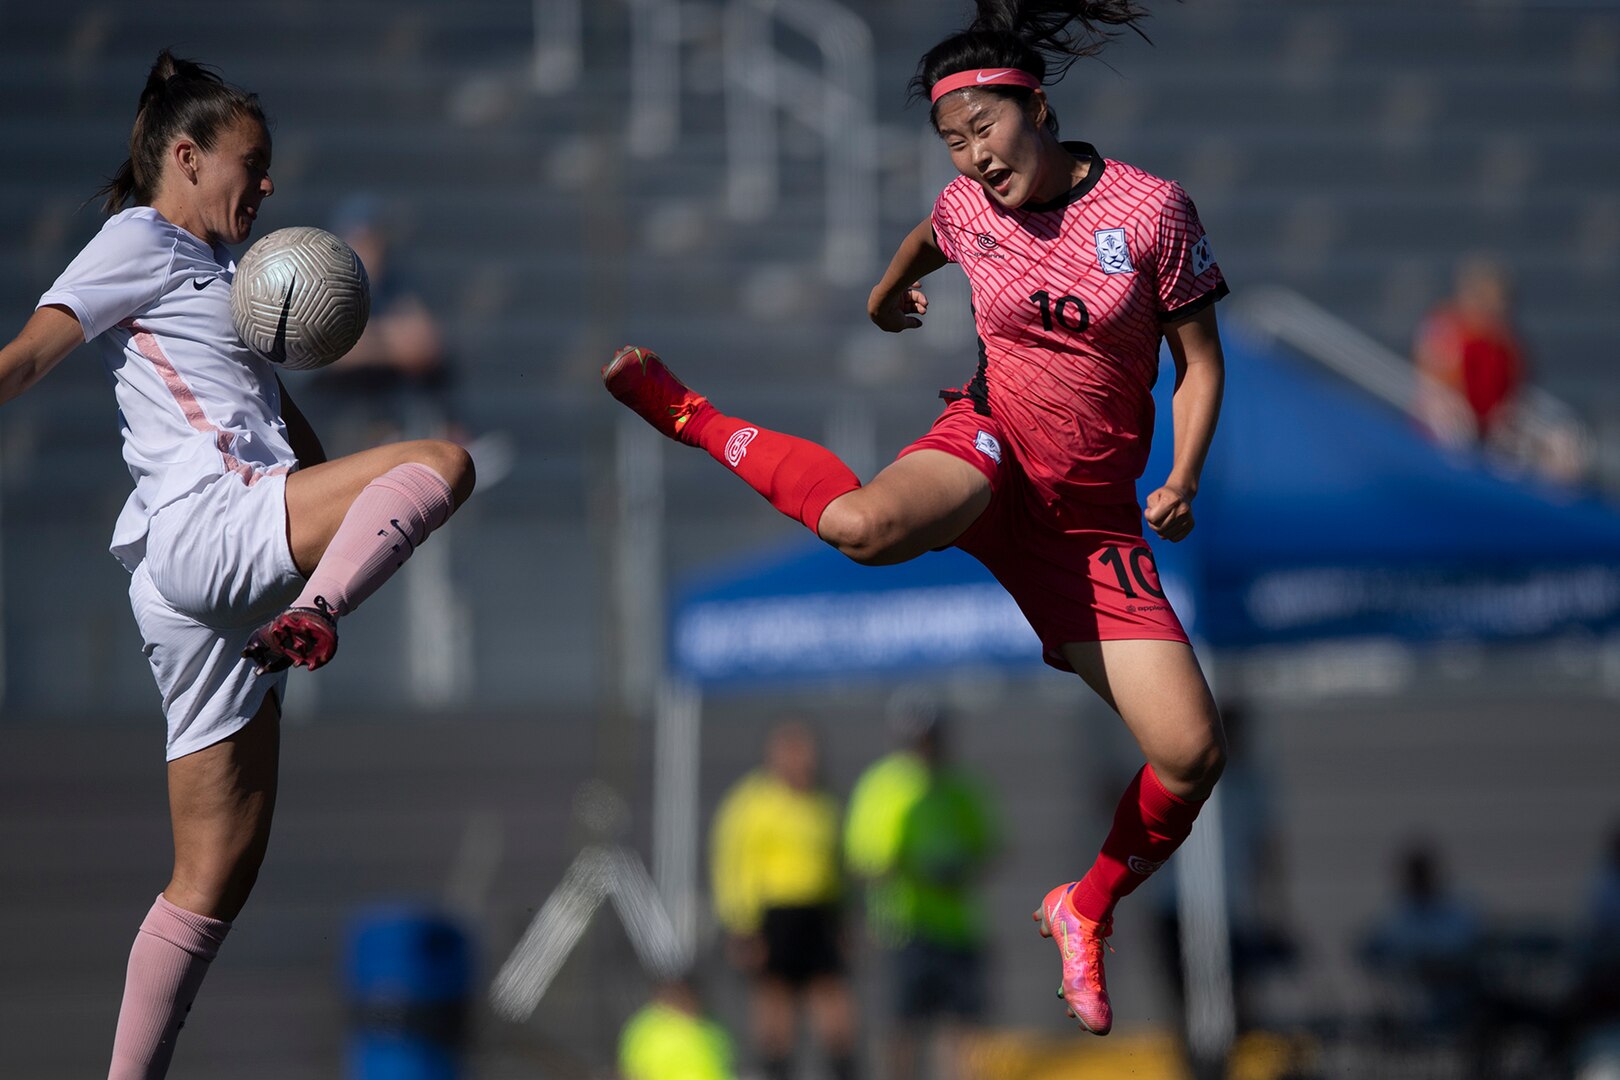 France’s Julie Narichaud blocks a shot by South Korea’s Sangme Ahn during the the 13th CISM (International Military Sports Council) World Military Women’s Football Championship in Meade, Washington July 20, 2022. (DoD photo by EJ Hersom)